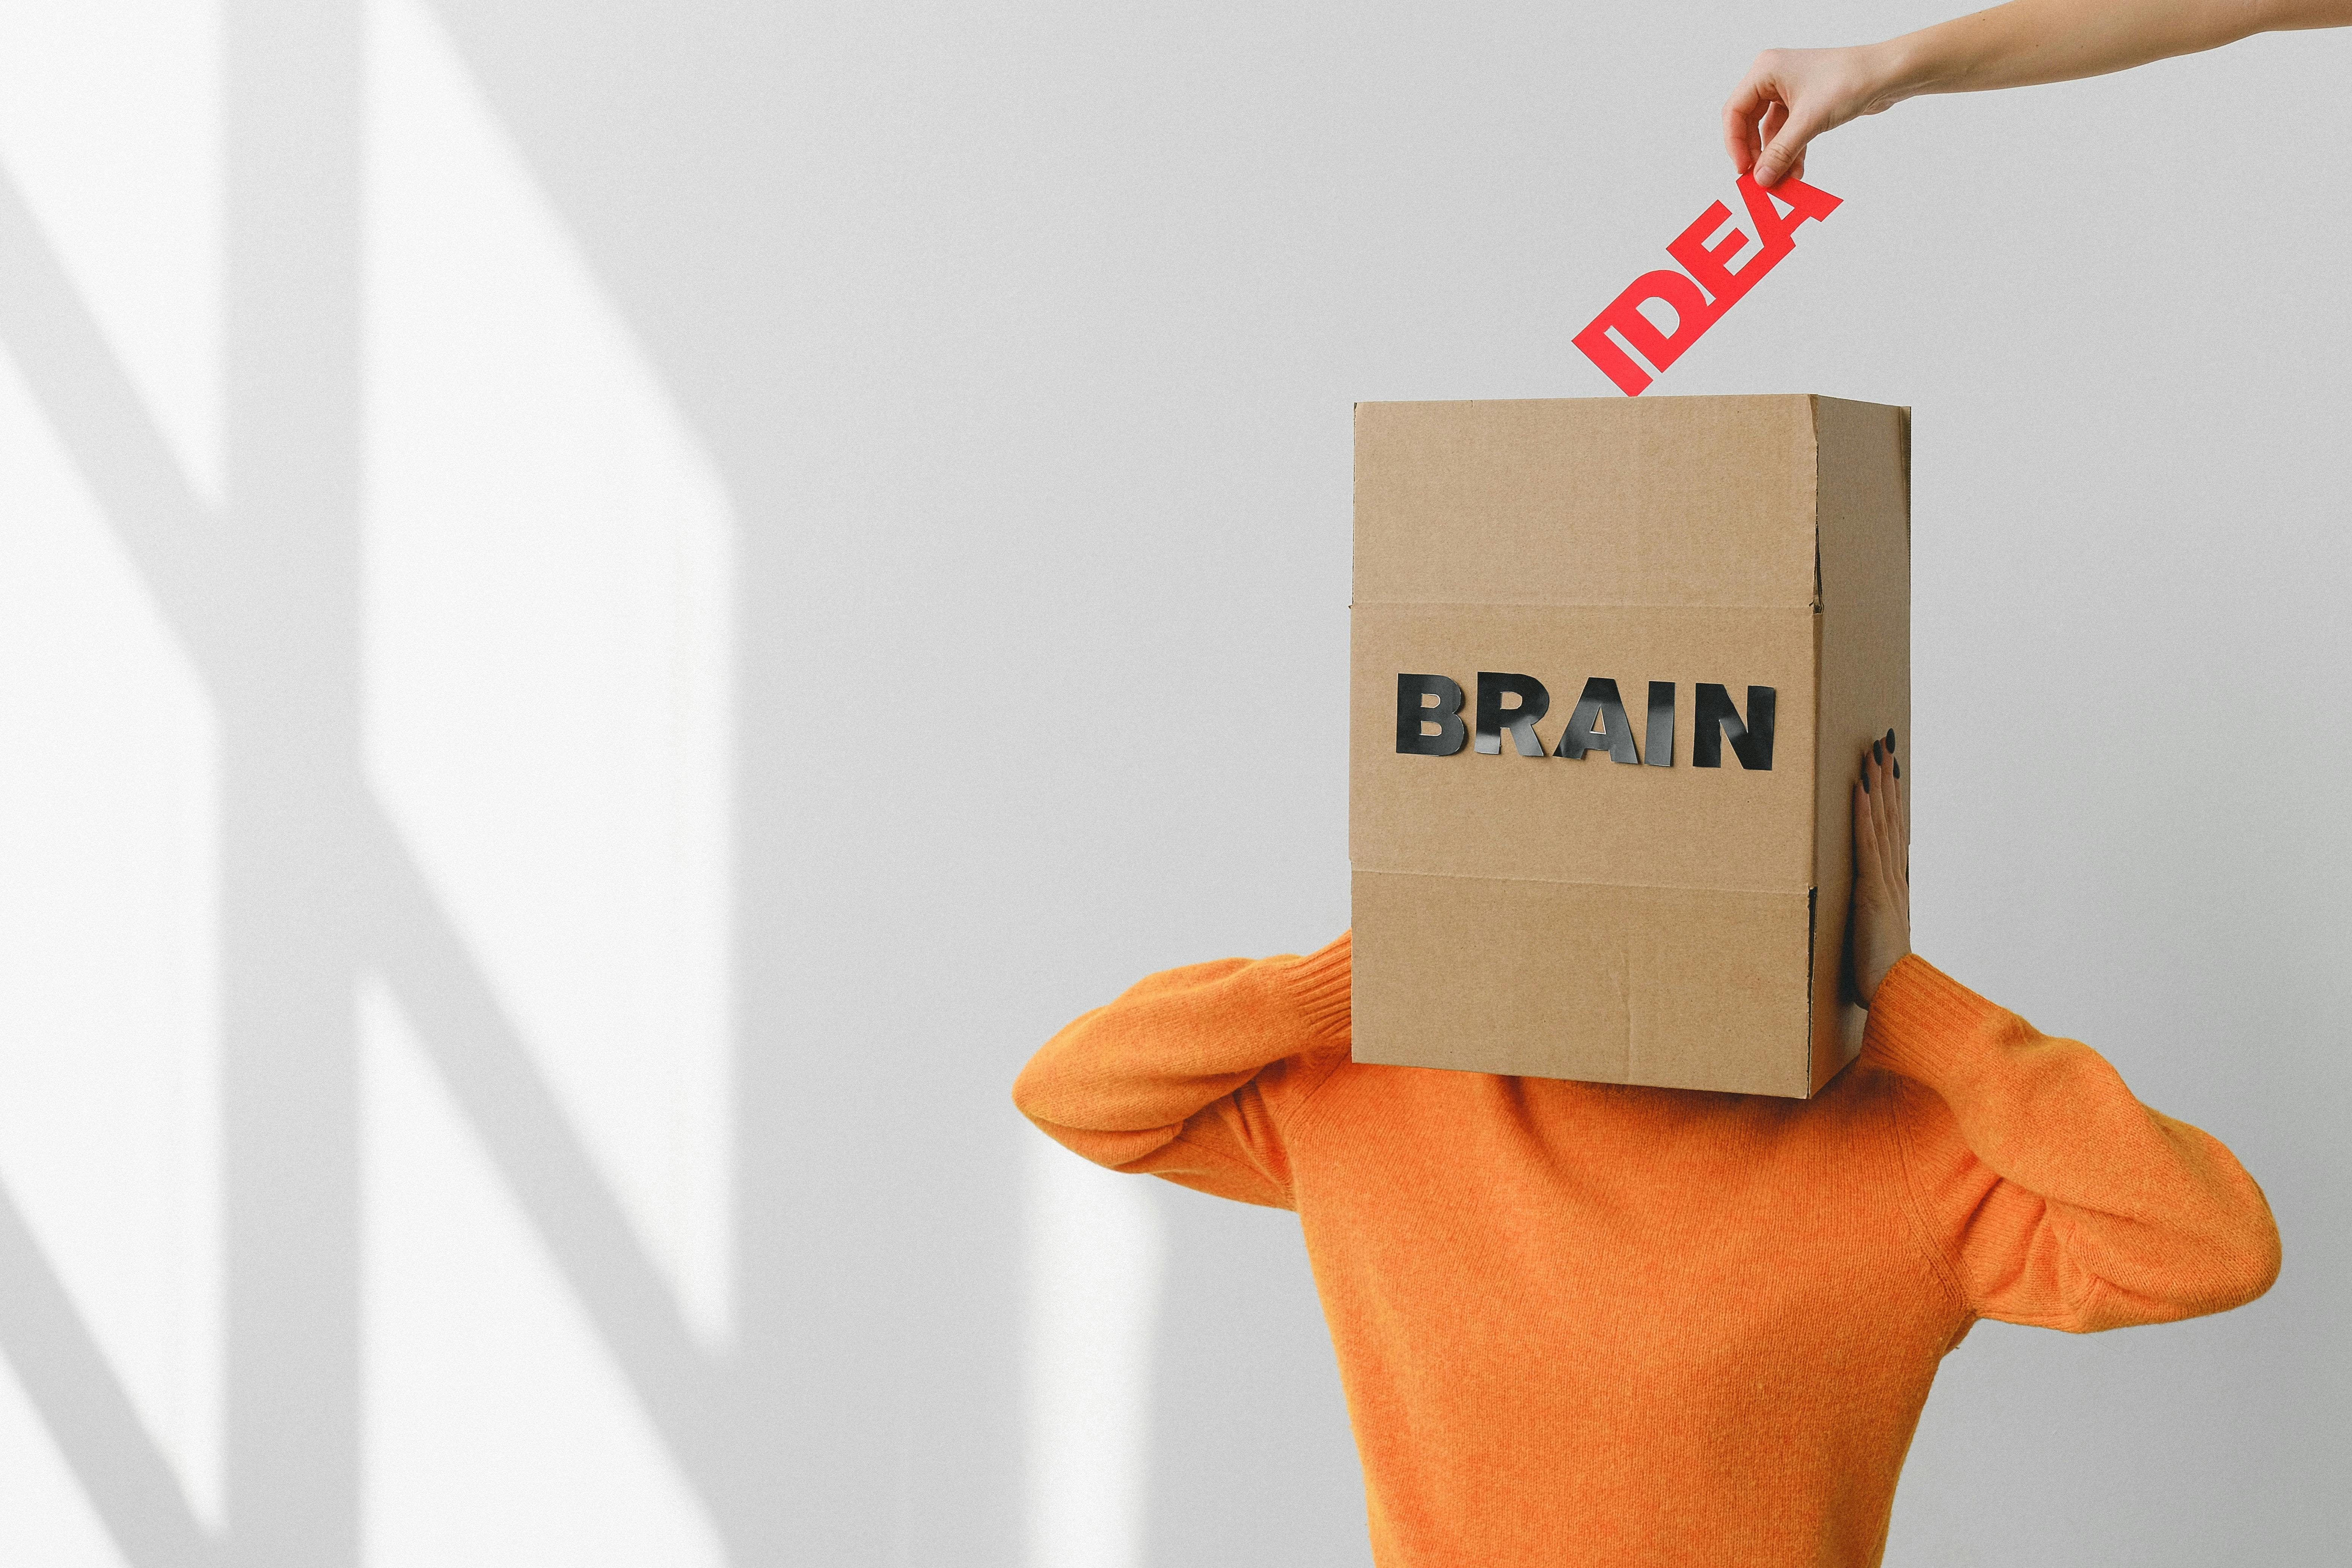 A cut out of text that says "idea" placed into the open top of a box labeled as "brain" being worn by a person.